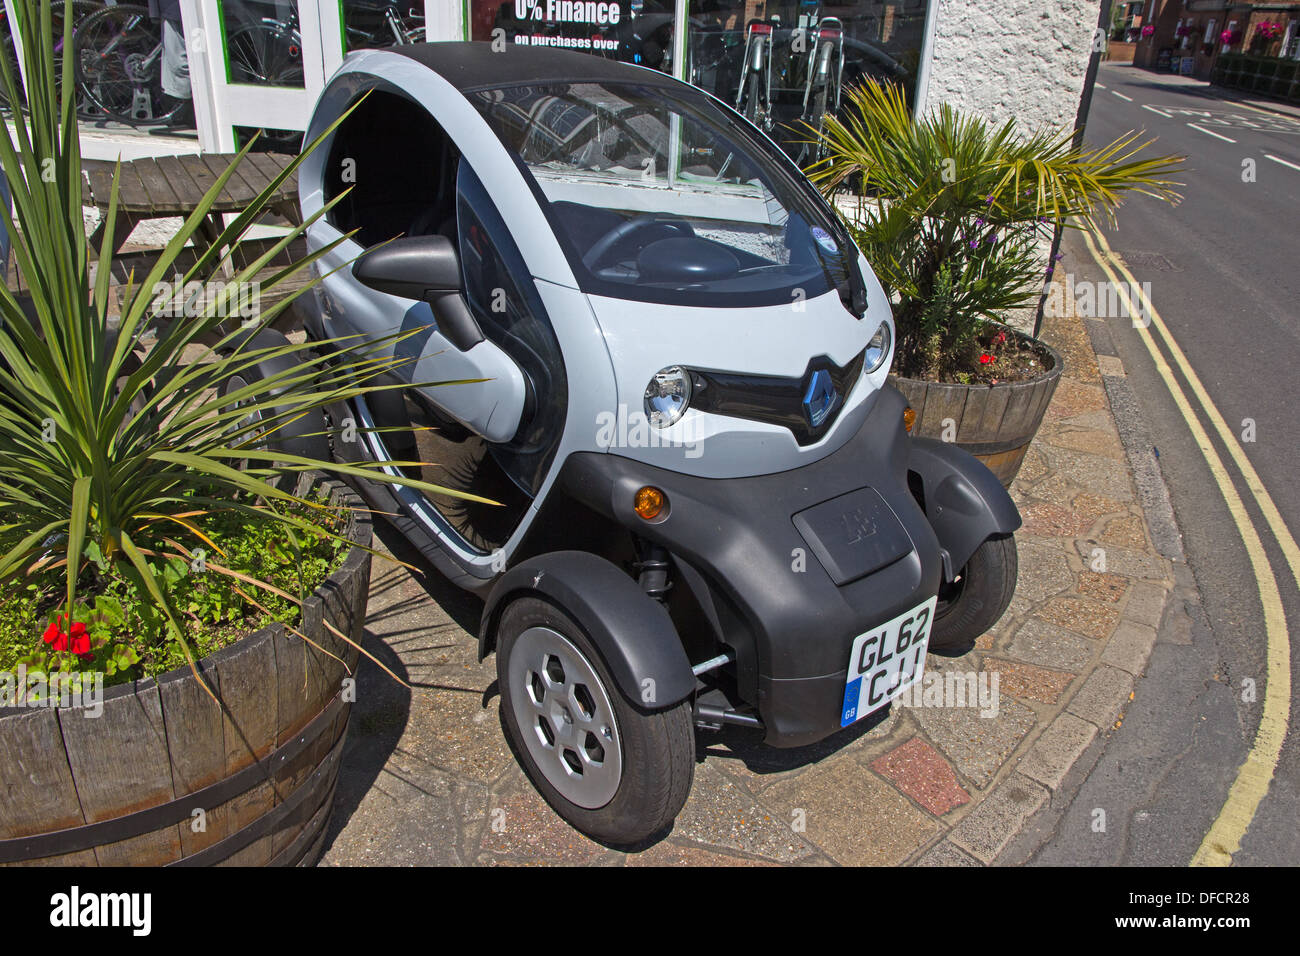 Renaul Twizy electric car for hire in New Forest town of Brockenhurst, Stock Photo